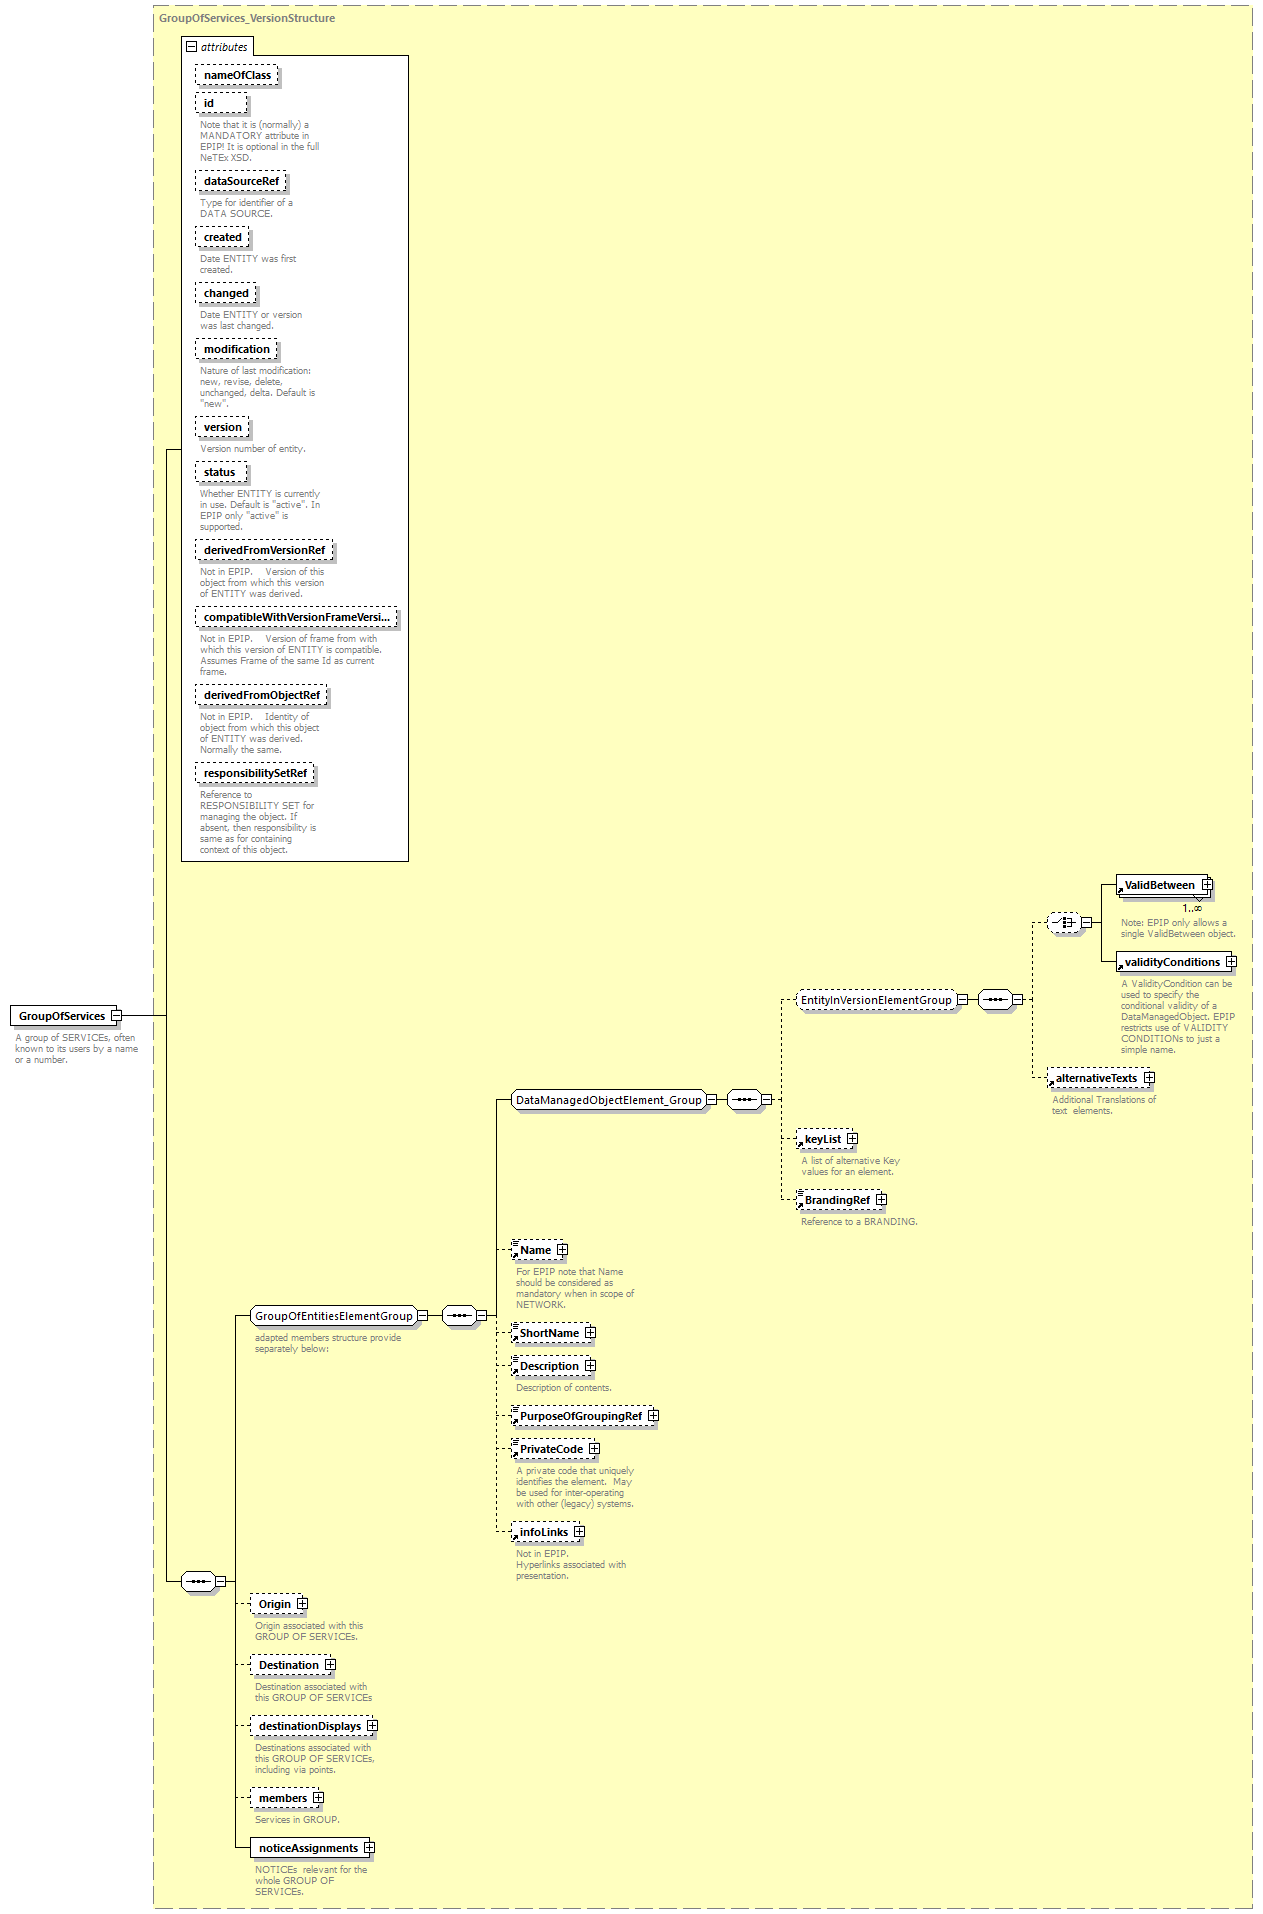 reduced_diagrams/reduced_p188.png